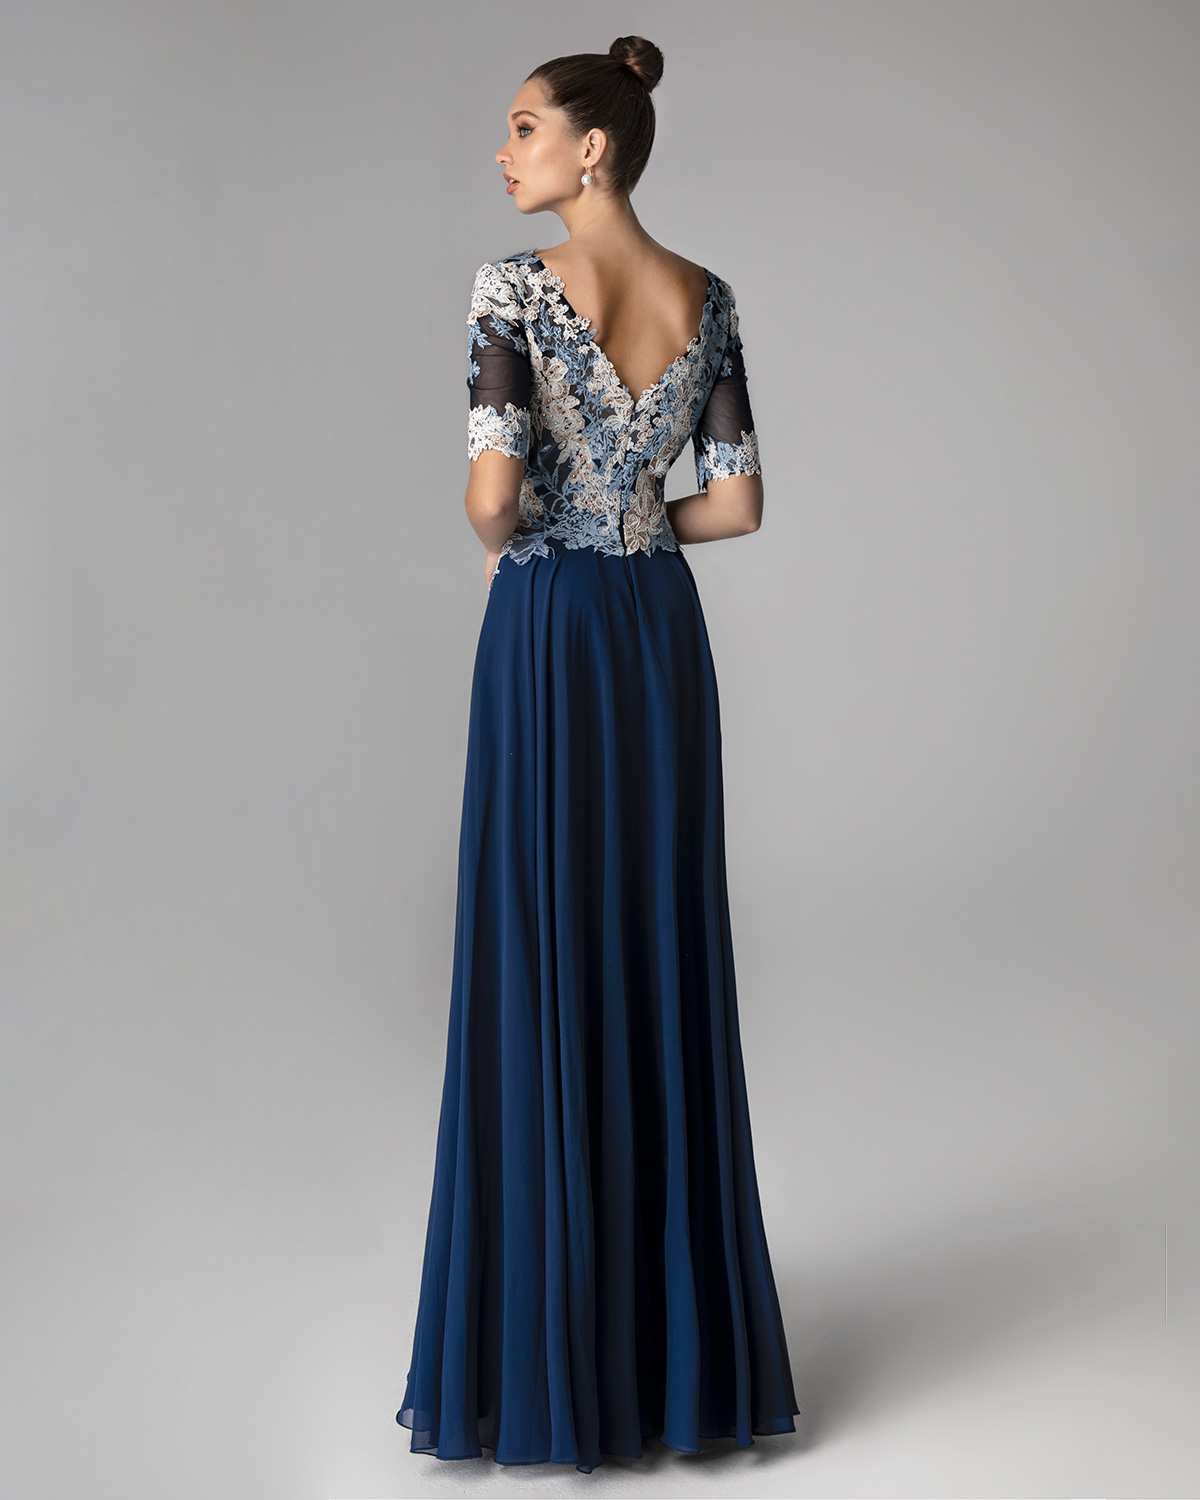 Классические платья / Long evening dress with applique lace on the top and short sleeves